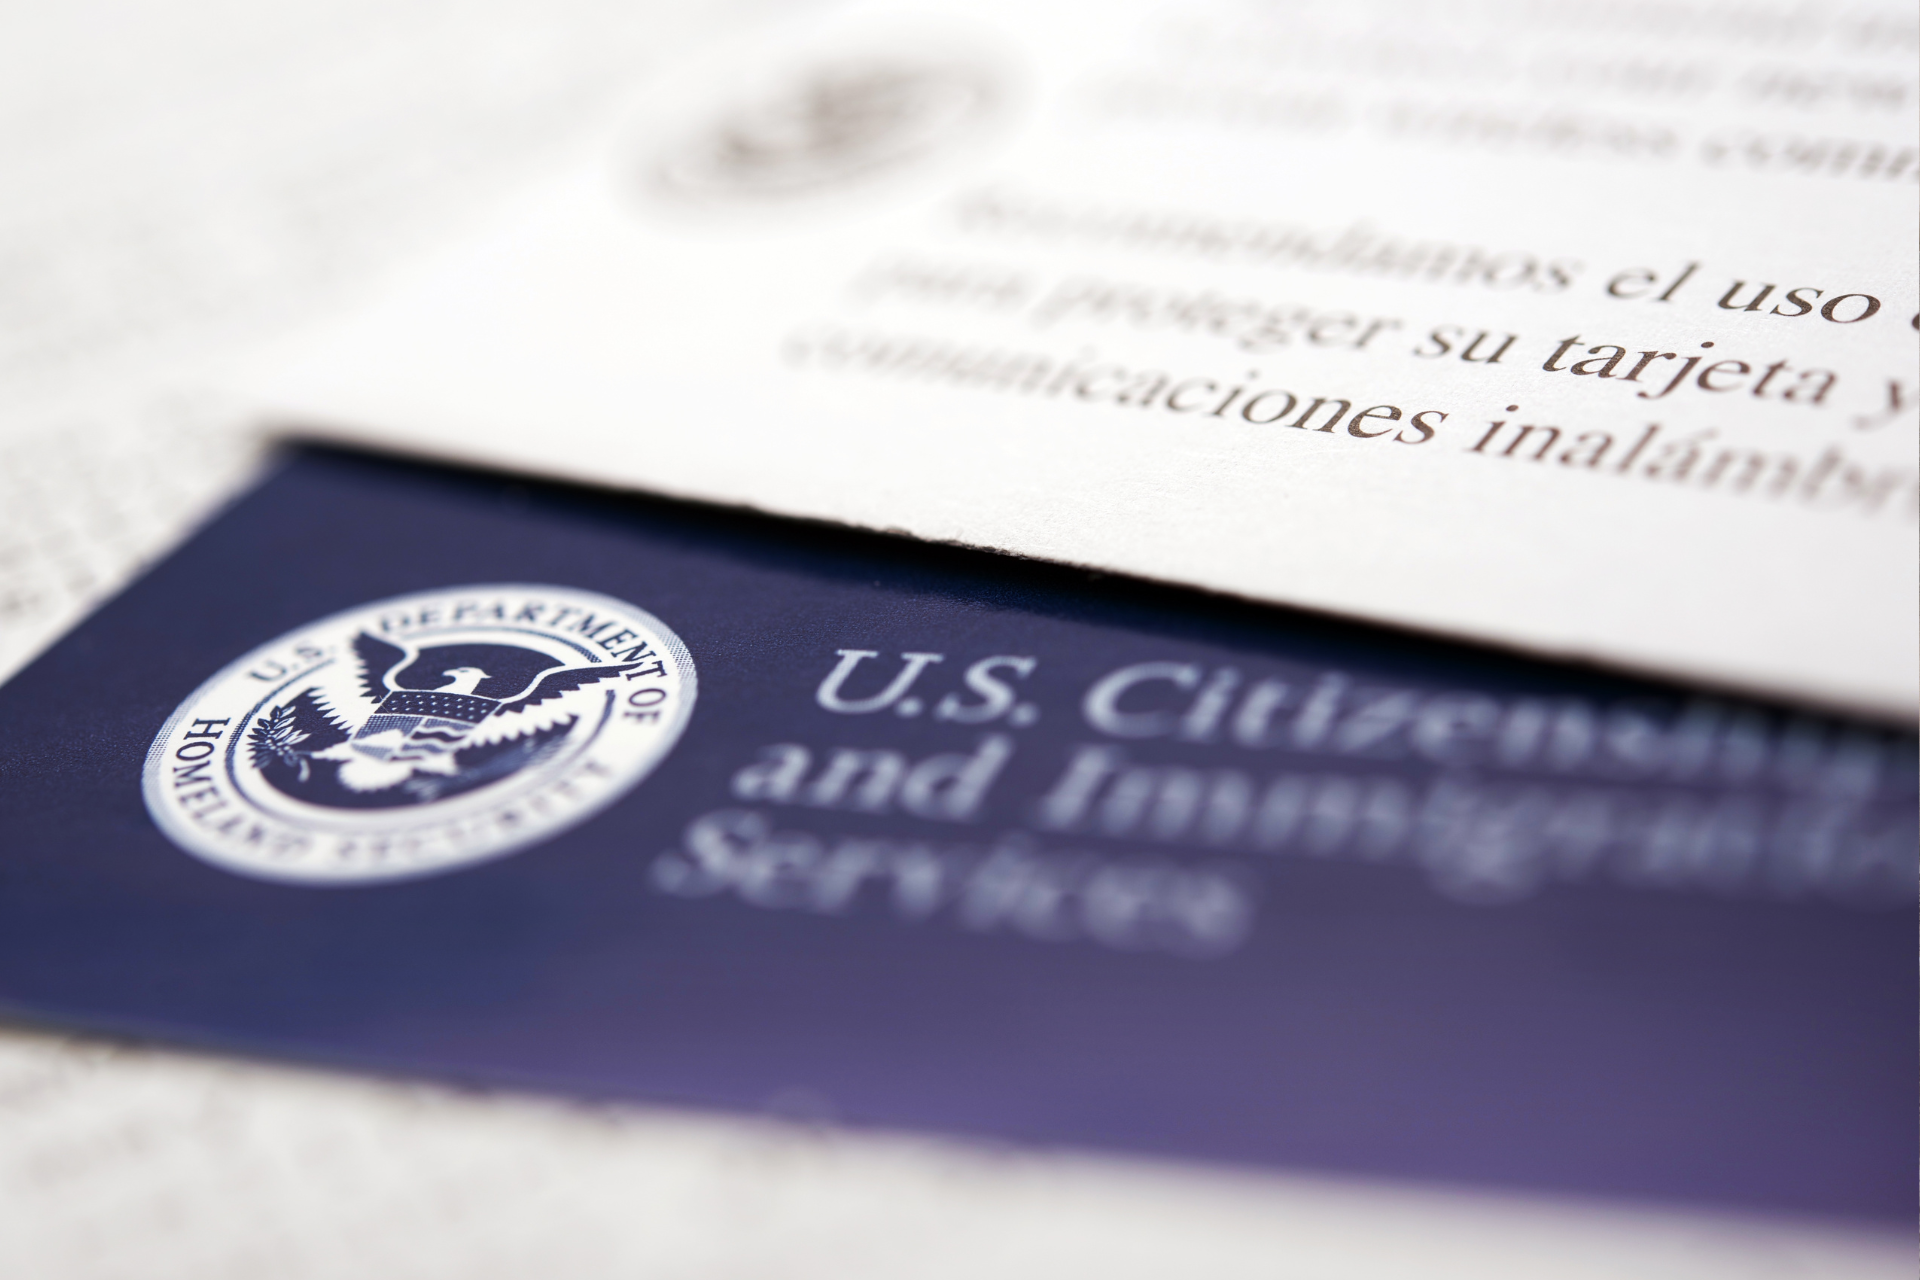 USCIS Expands Automatic Extension of Employment Authorization to Improve Work Permit Access